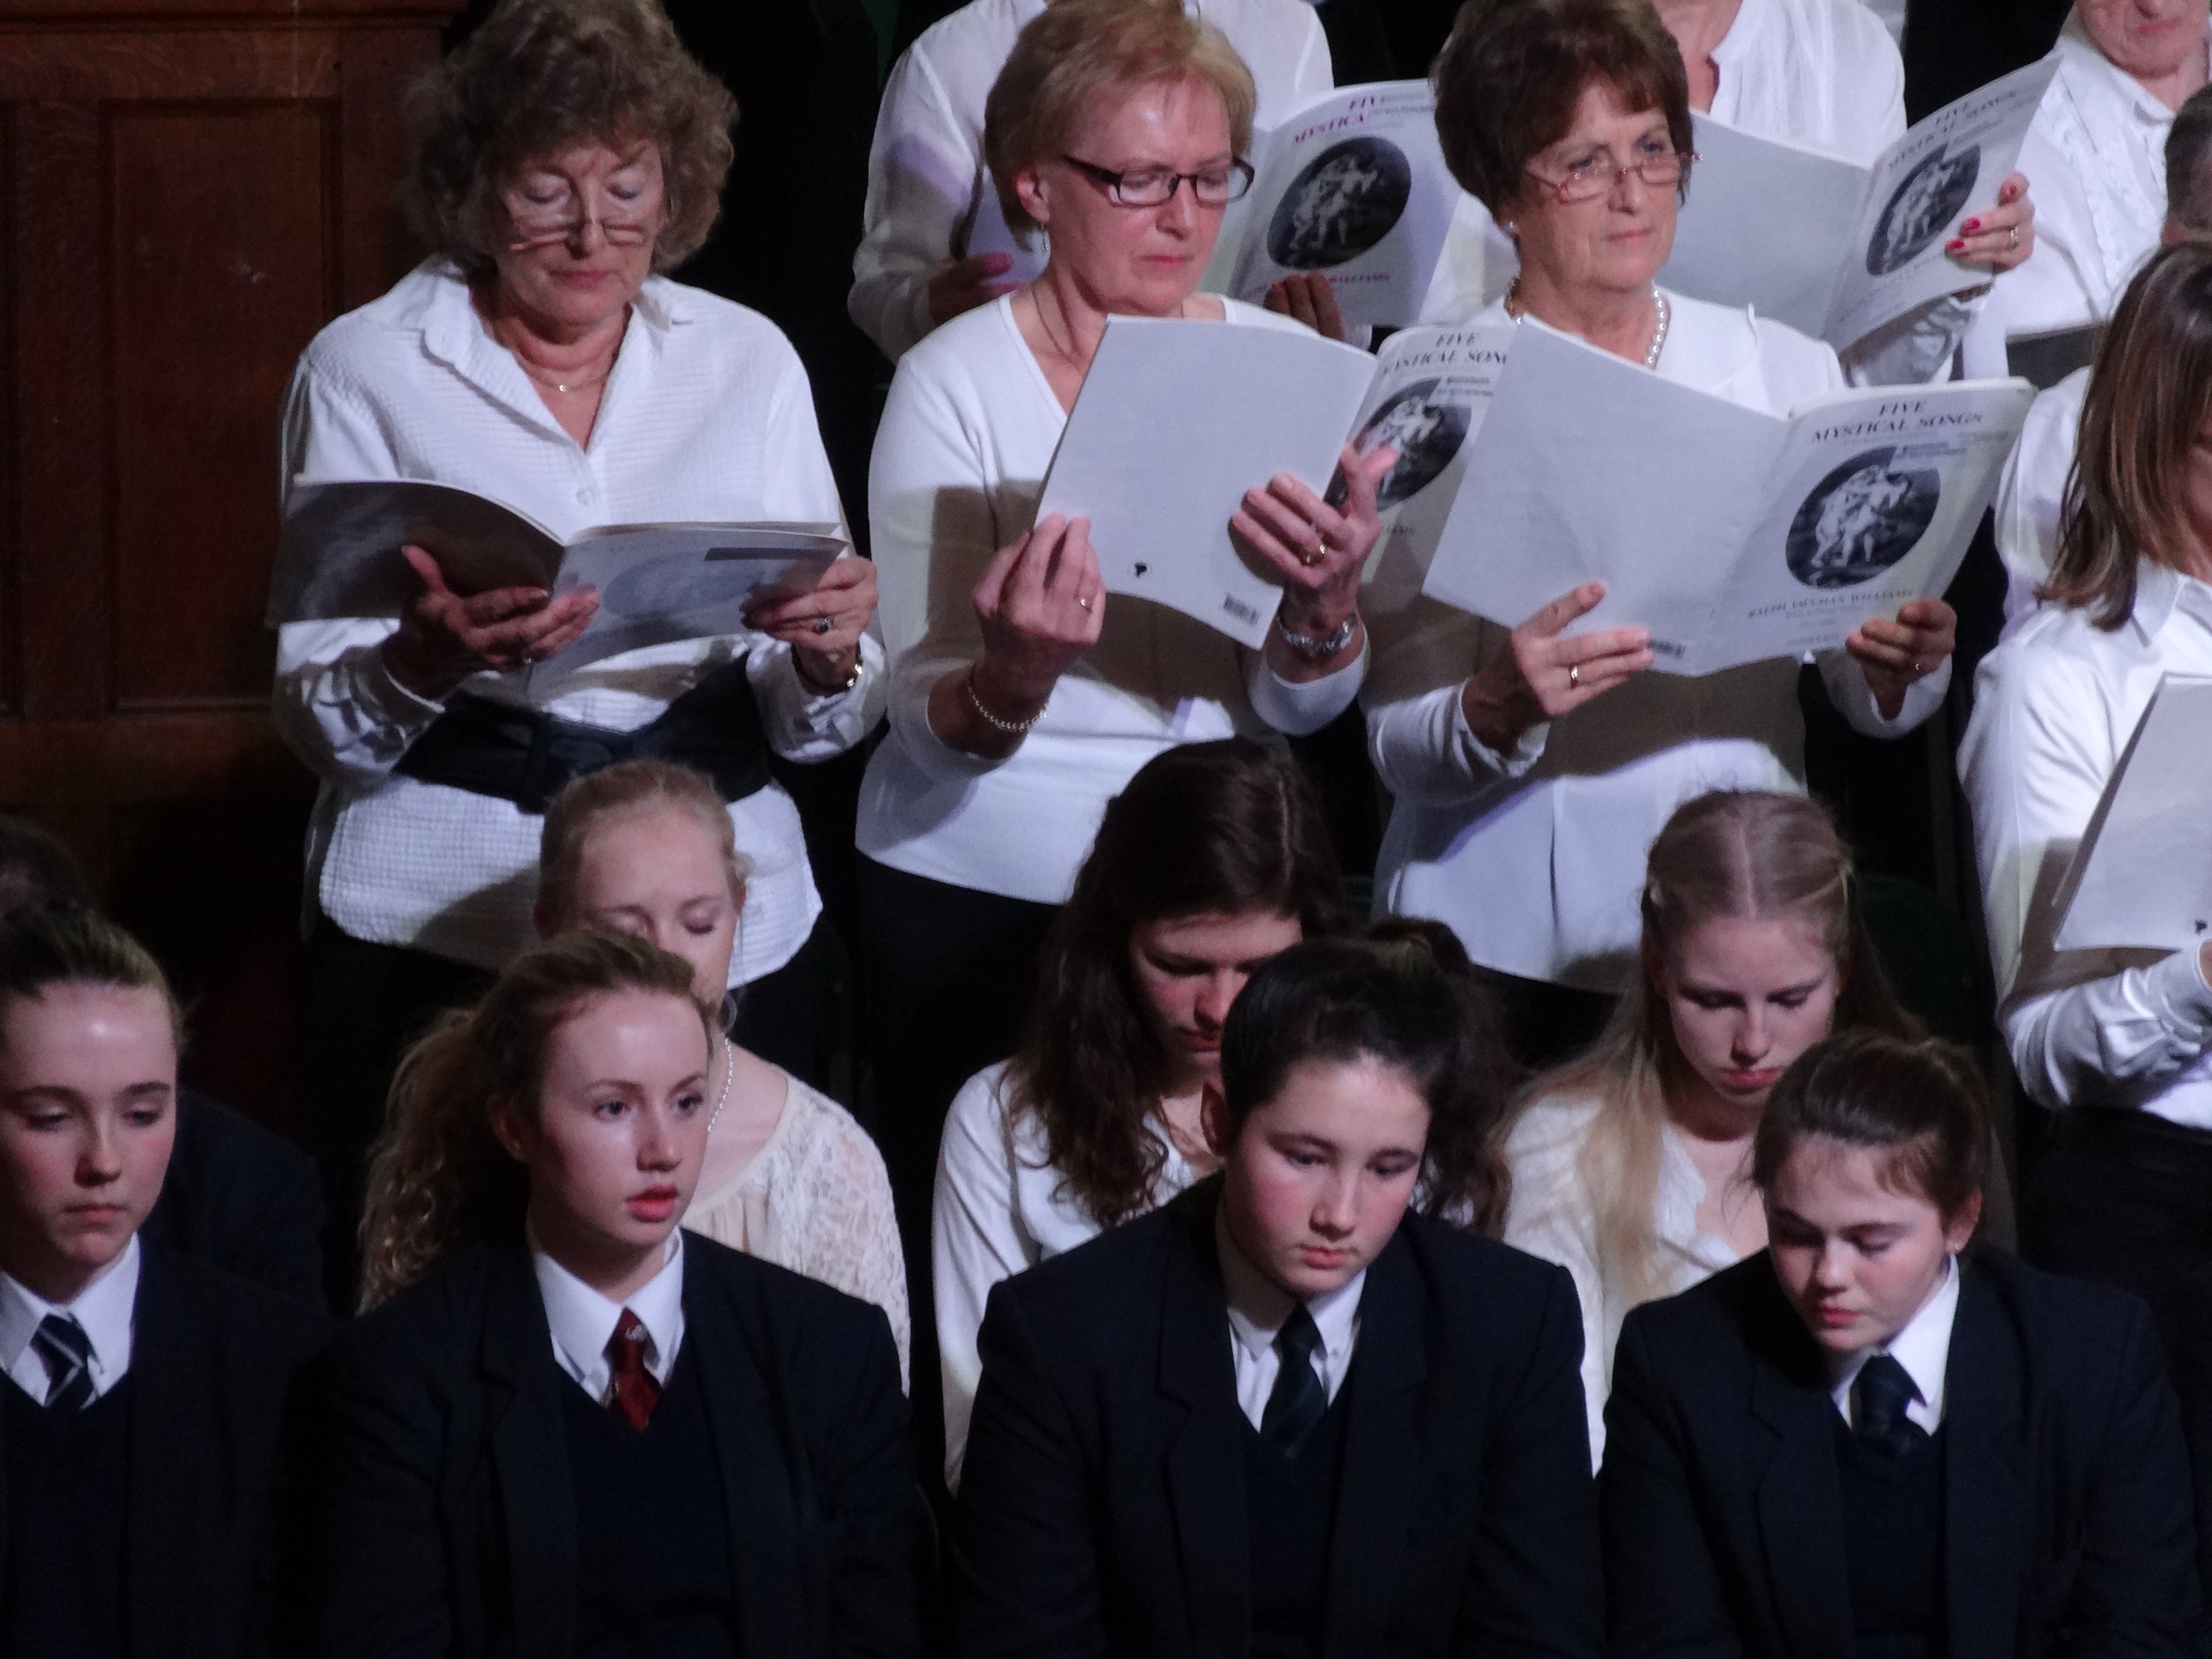 Choral Society Concert, Faure and Vaughan Williams: Saturday 21st March 2015